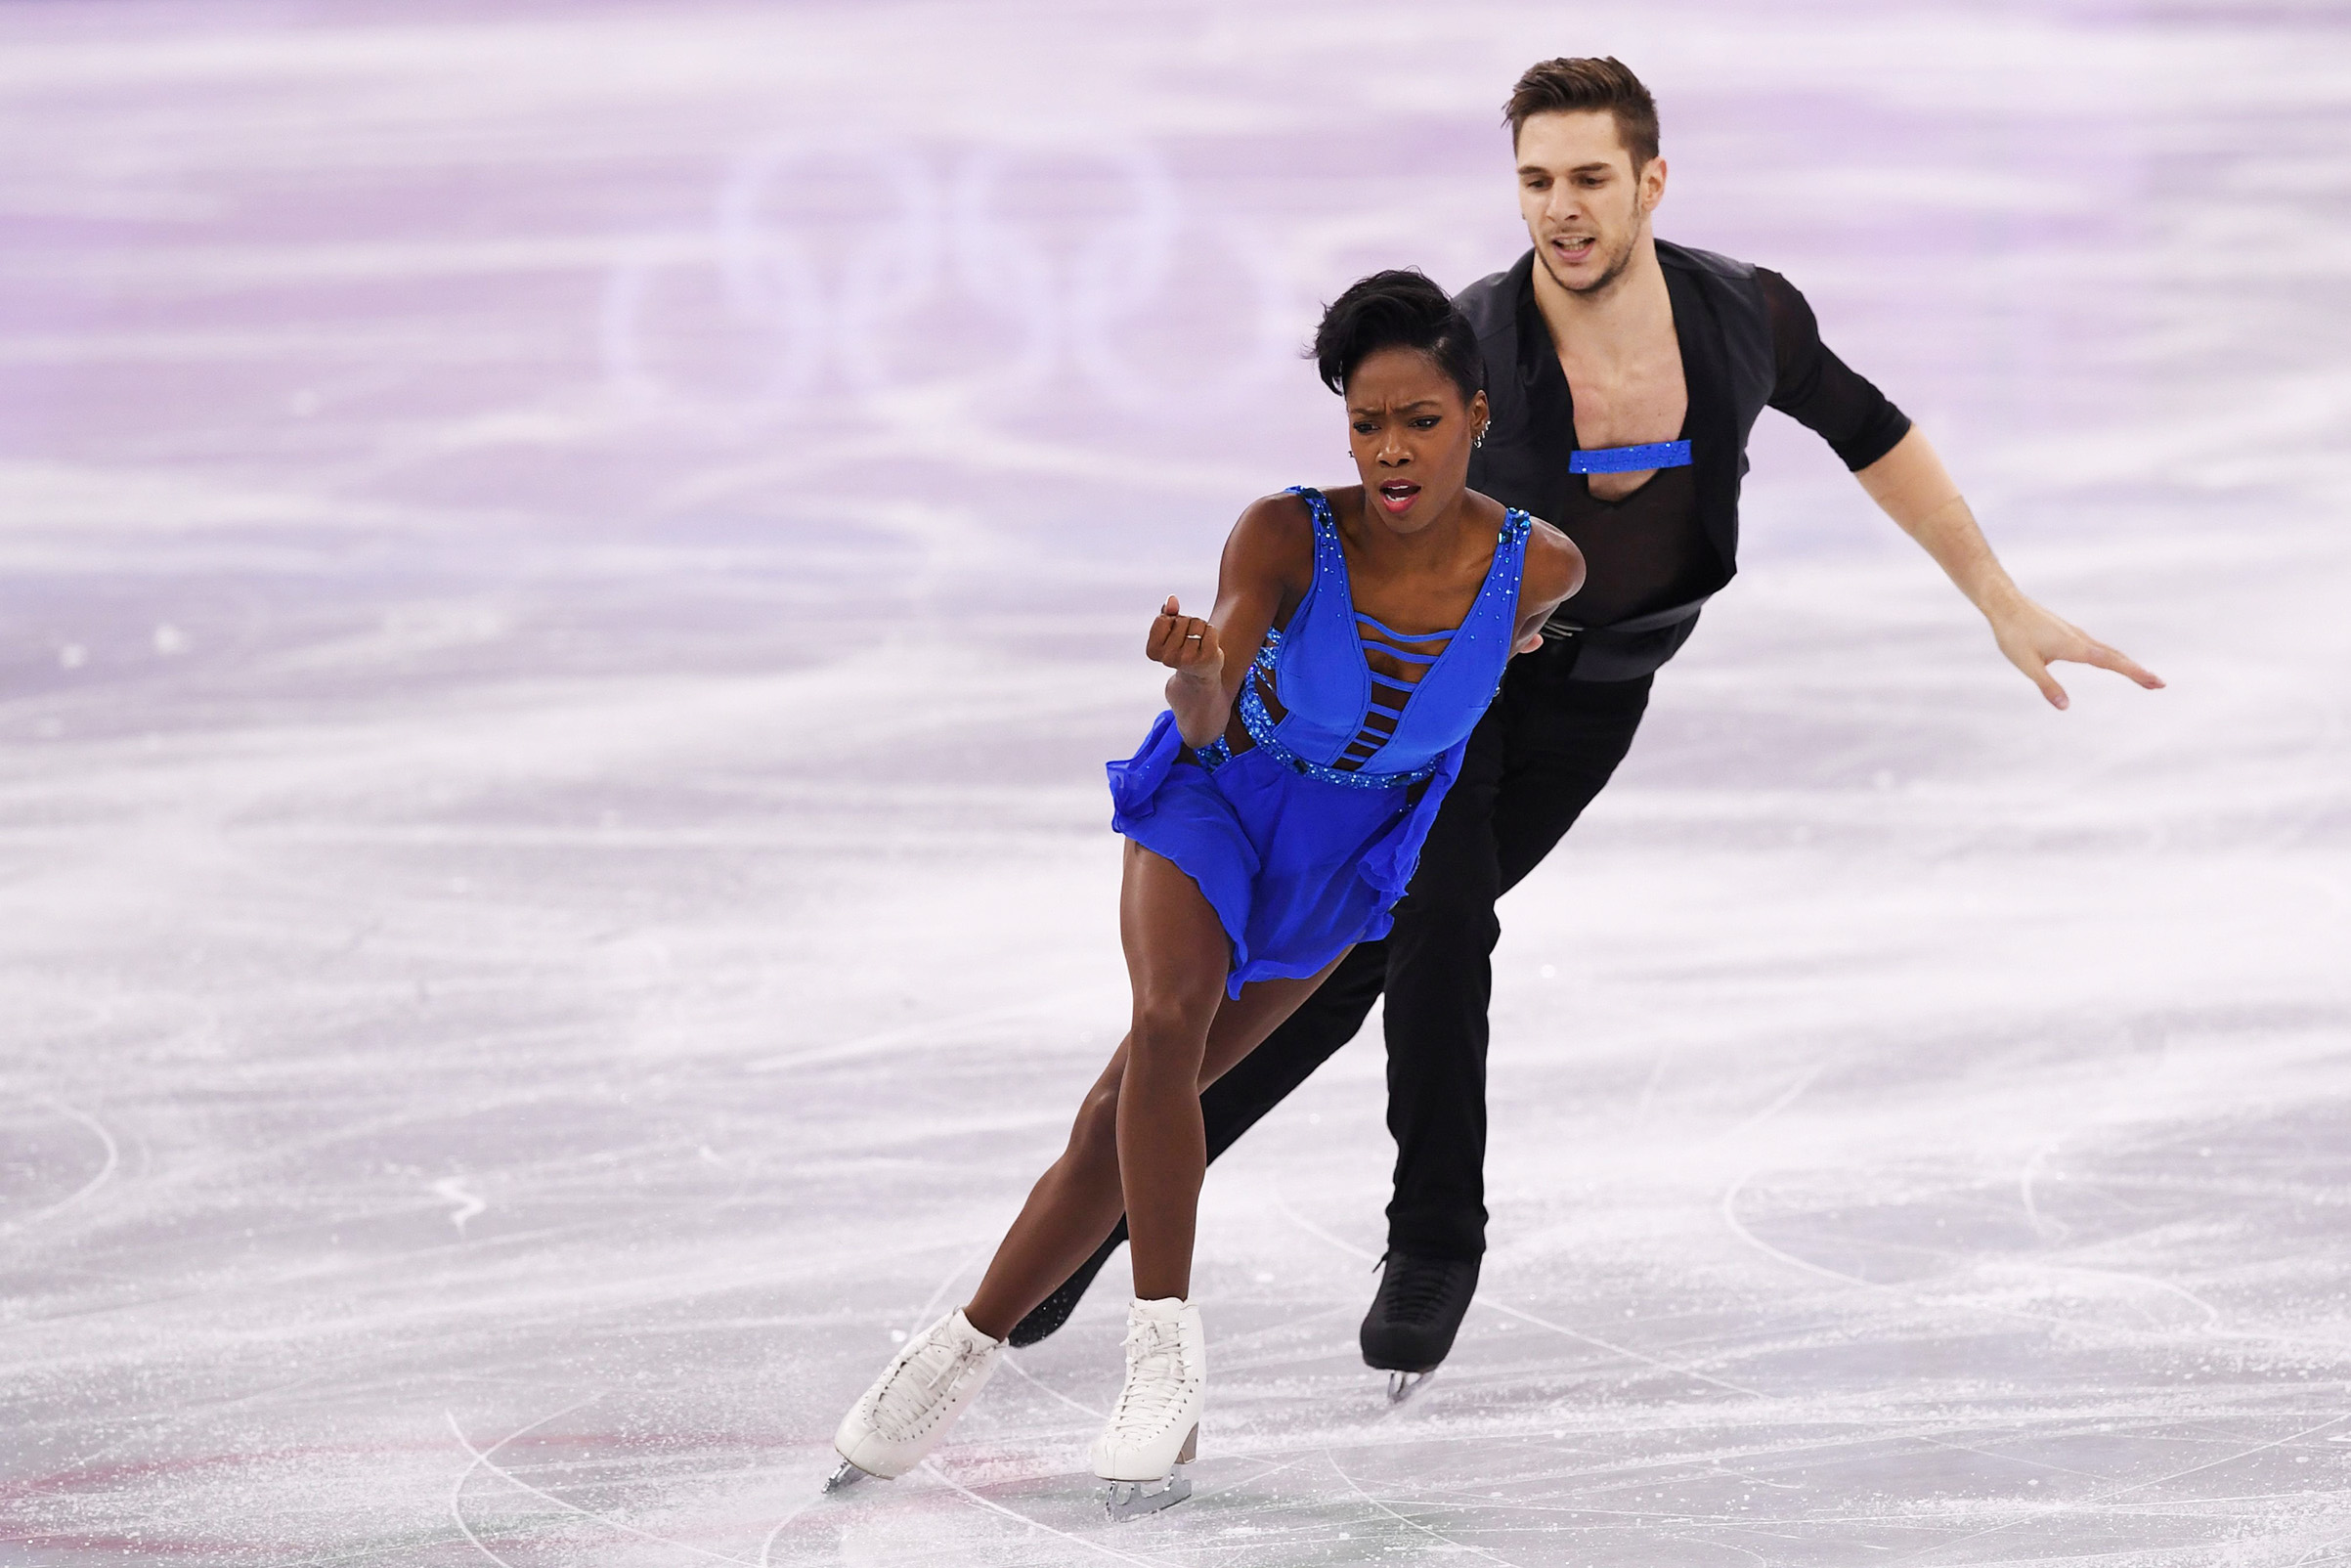 France's Vanessa James and Morgan Cipres compete in the pair skating short program of the figure skating event during the Pyeongchang 2018 Winter Olympic Games at the Gangneung Ice Arena in Gangneung on Feb. 14, 2018. (Jung Yeon-je—AFP/Getty Images)